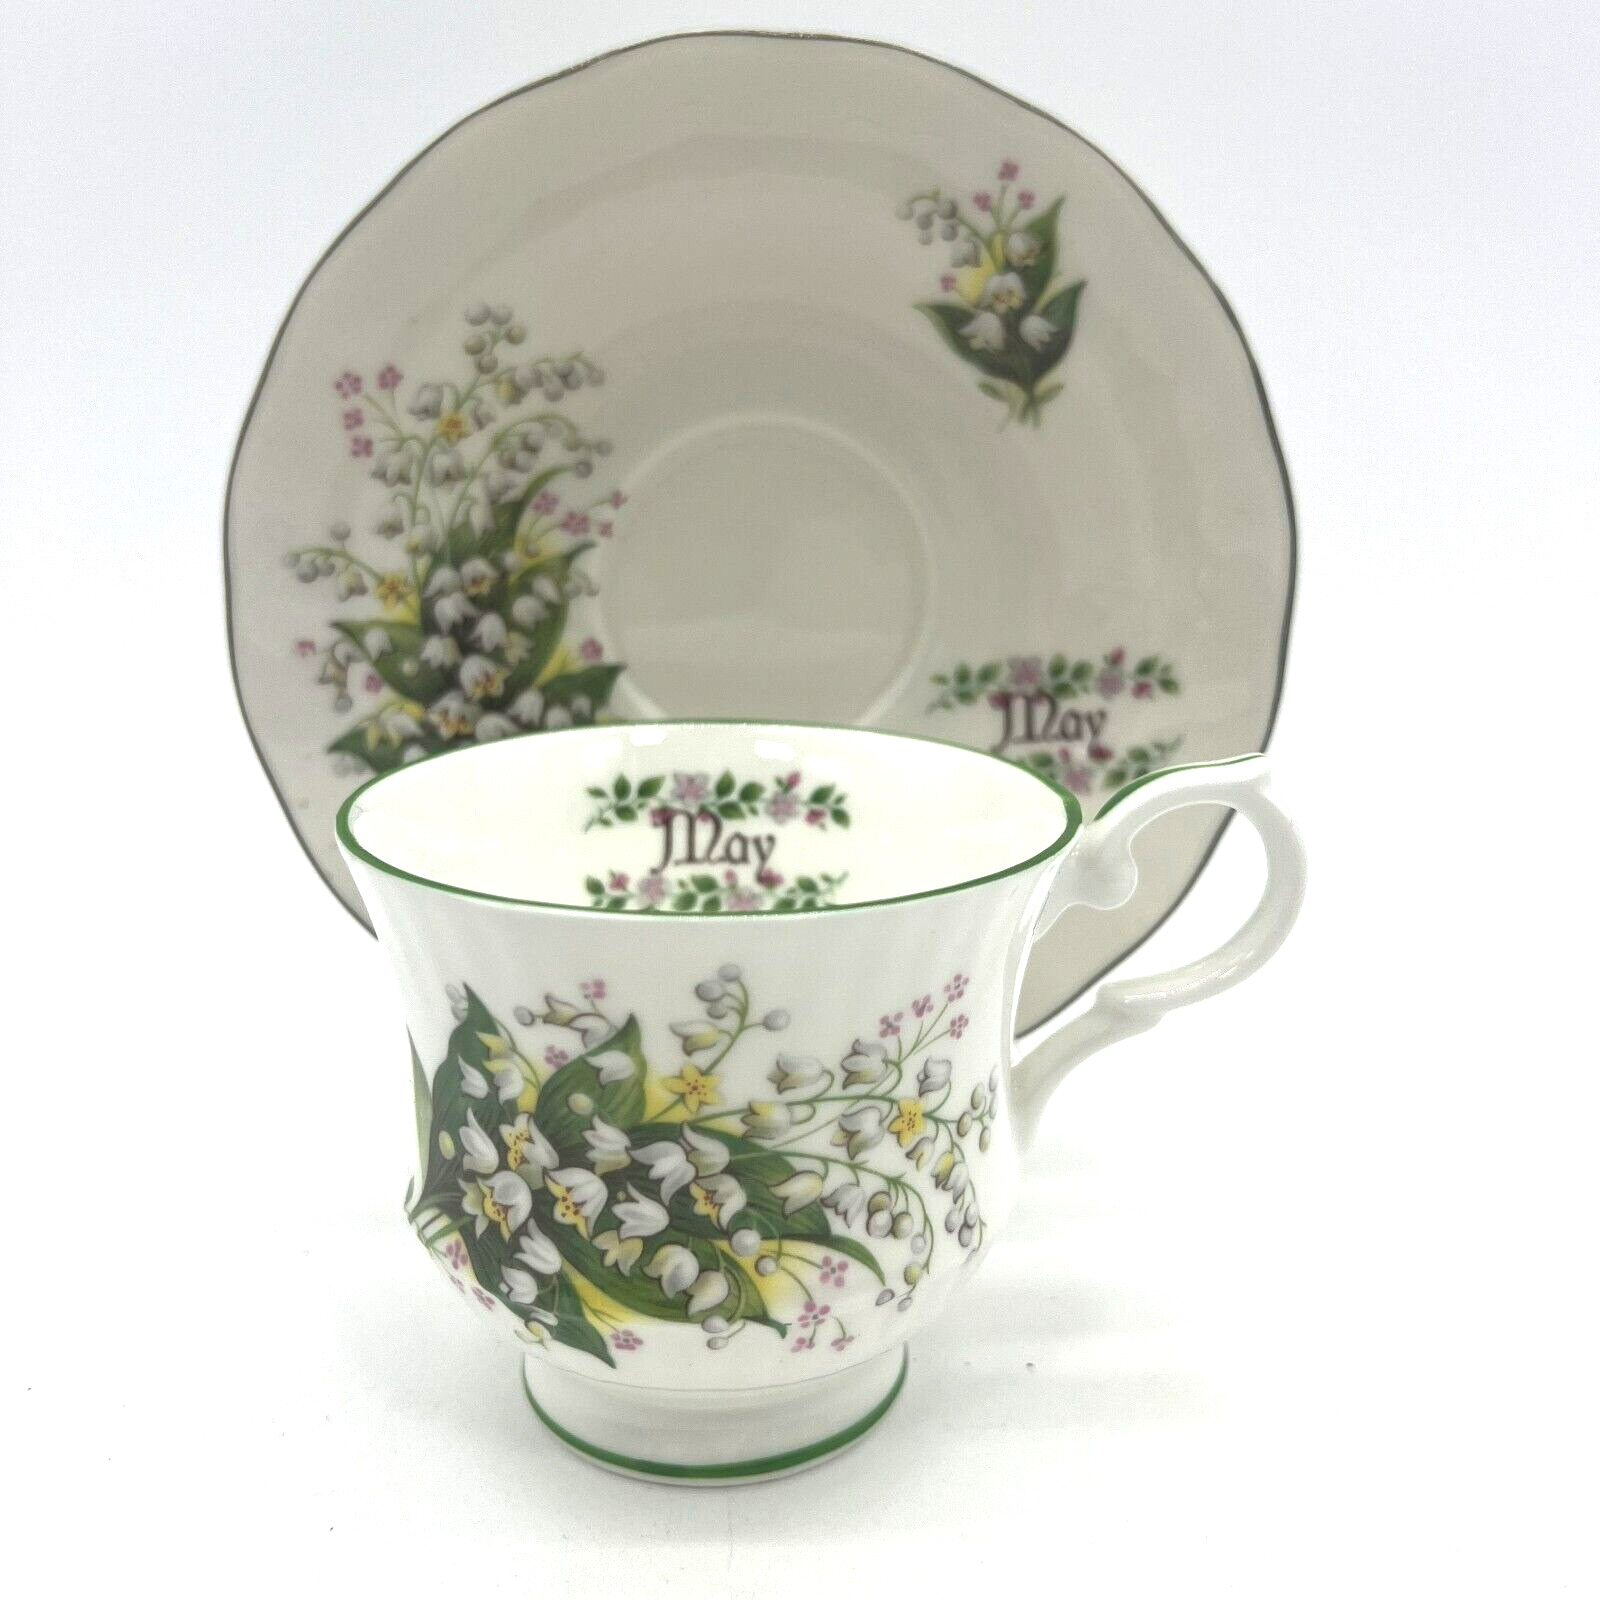 Vintage MAY Lily of the Valley Springfield Bone China Teacup and Saucer